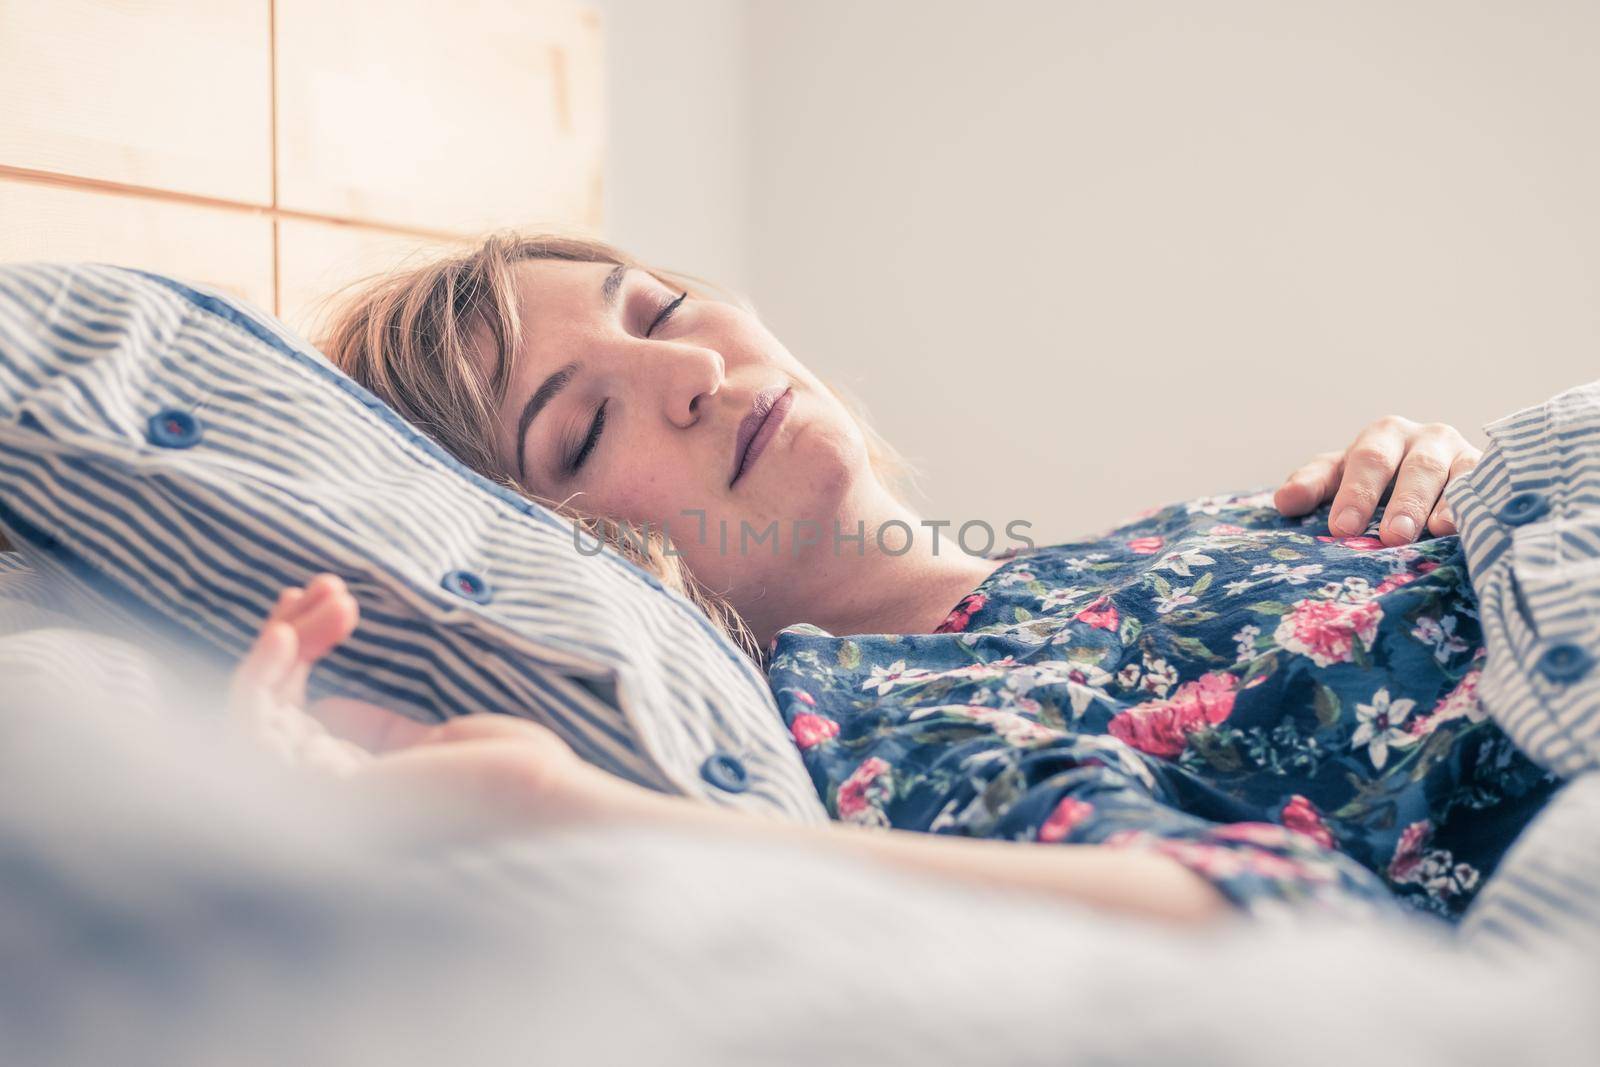 Young woman sleeping peacefully in her bedroom, day